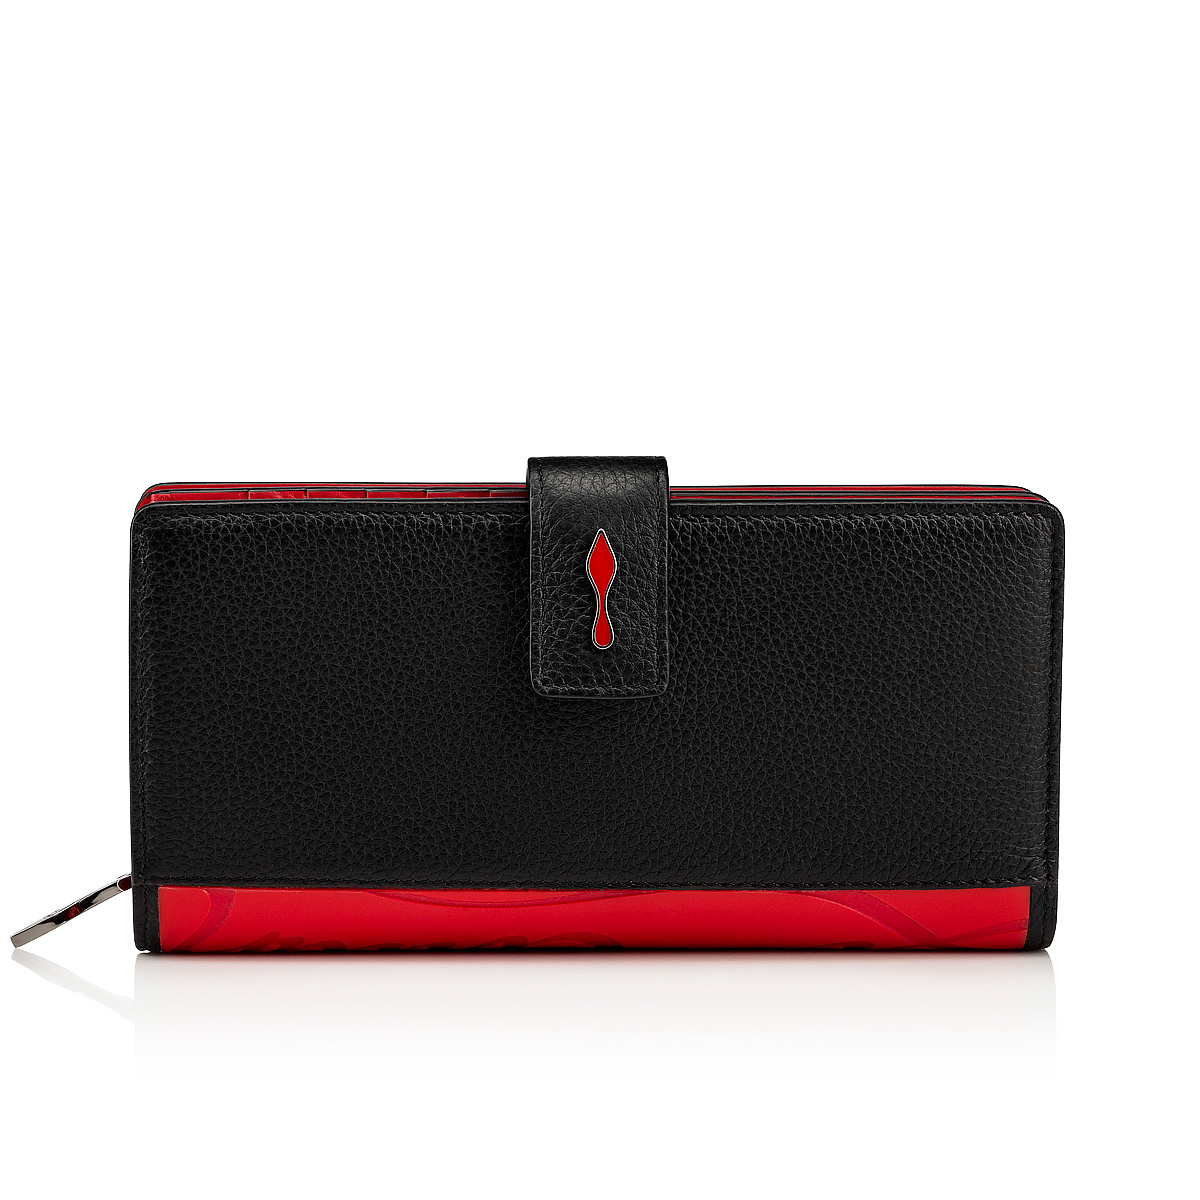 Paloma - Wallet - Grained calf leather - Black - Christian Louboutin